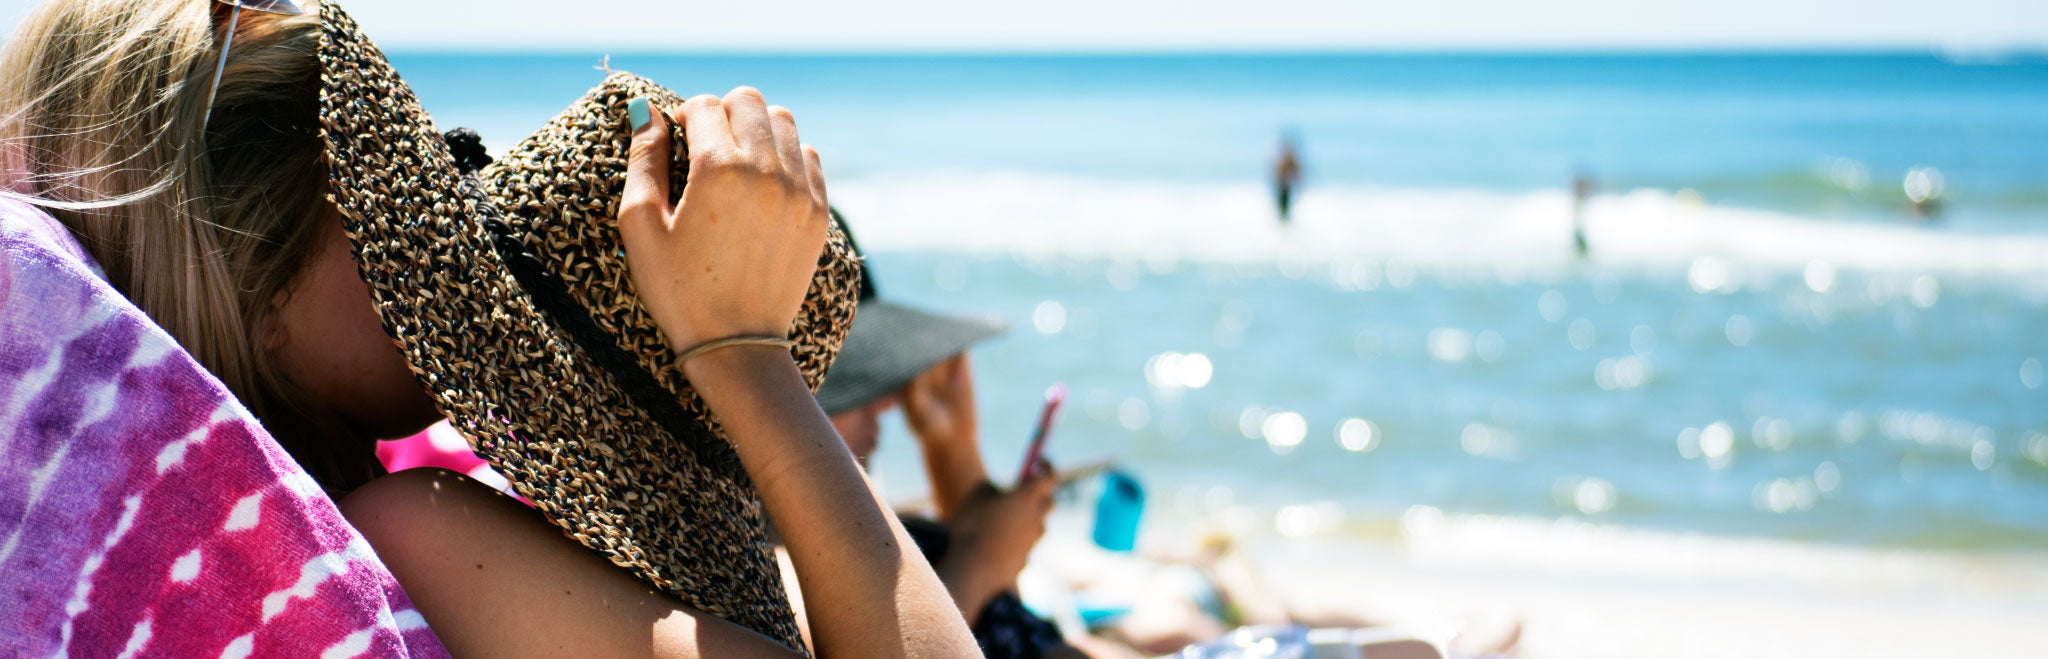 The 5 Most Dangerous Sun Safety and Skin Health Myths - A Dermatologist's Perspective